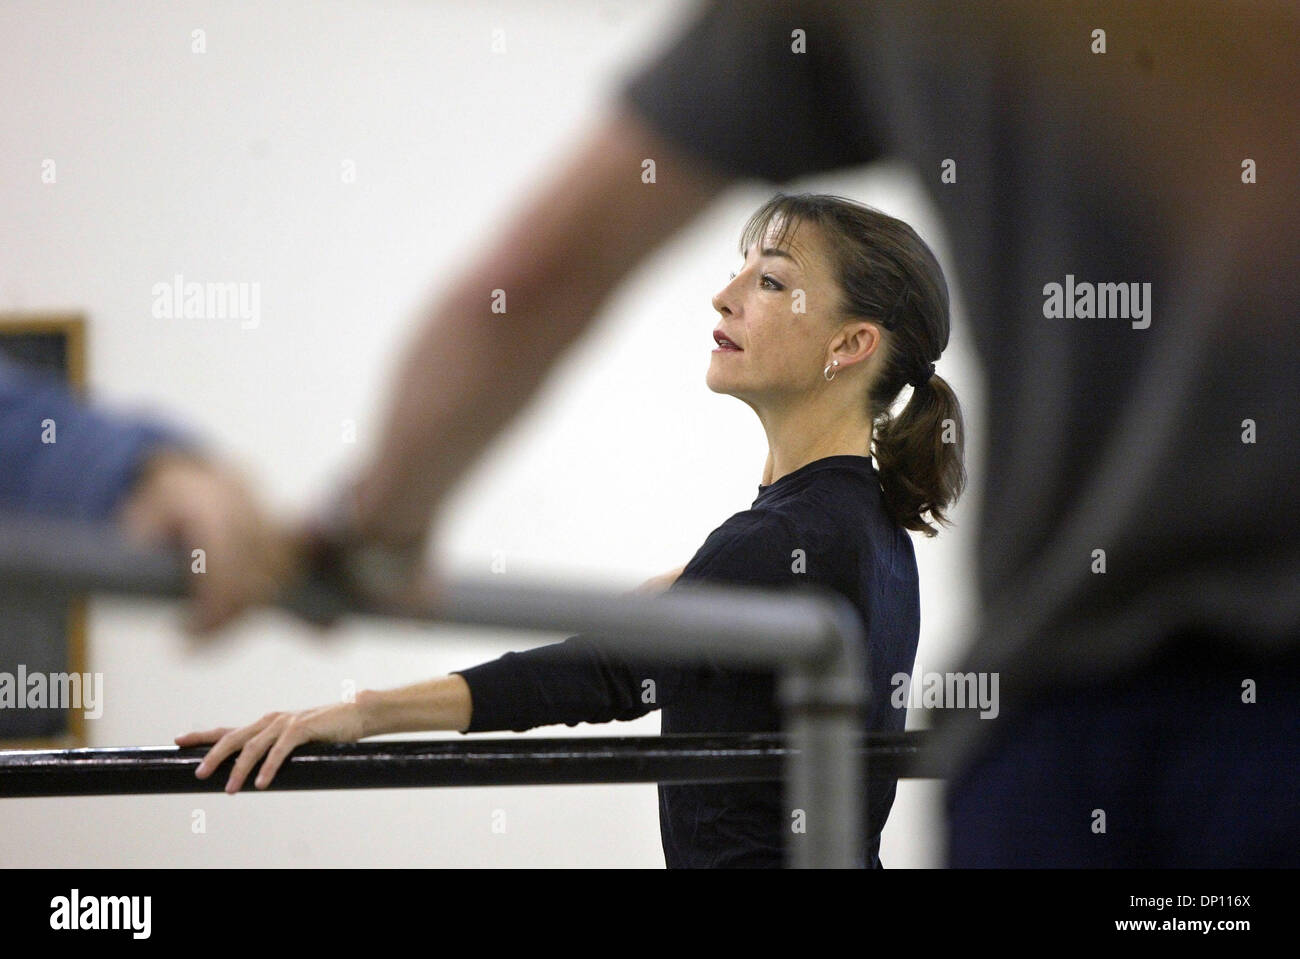 Apr 11, 2006; West Palm Beach, FL, USA; Jennifer Cole, a dancer who has been with Ballet Florida since the company's inception 20 years ago. These shots are during rehearsal.  Mandatory Credit: Photo by Taylor Jones/Palm Beach Post /ZUMA Press. (©) Copyright 2006 by Palm Beach Post Stock Photo